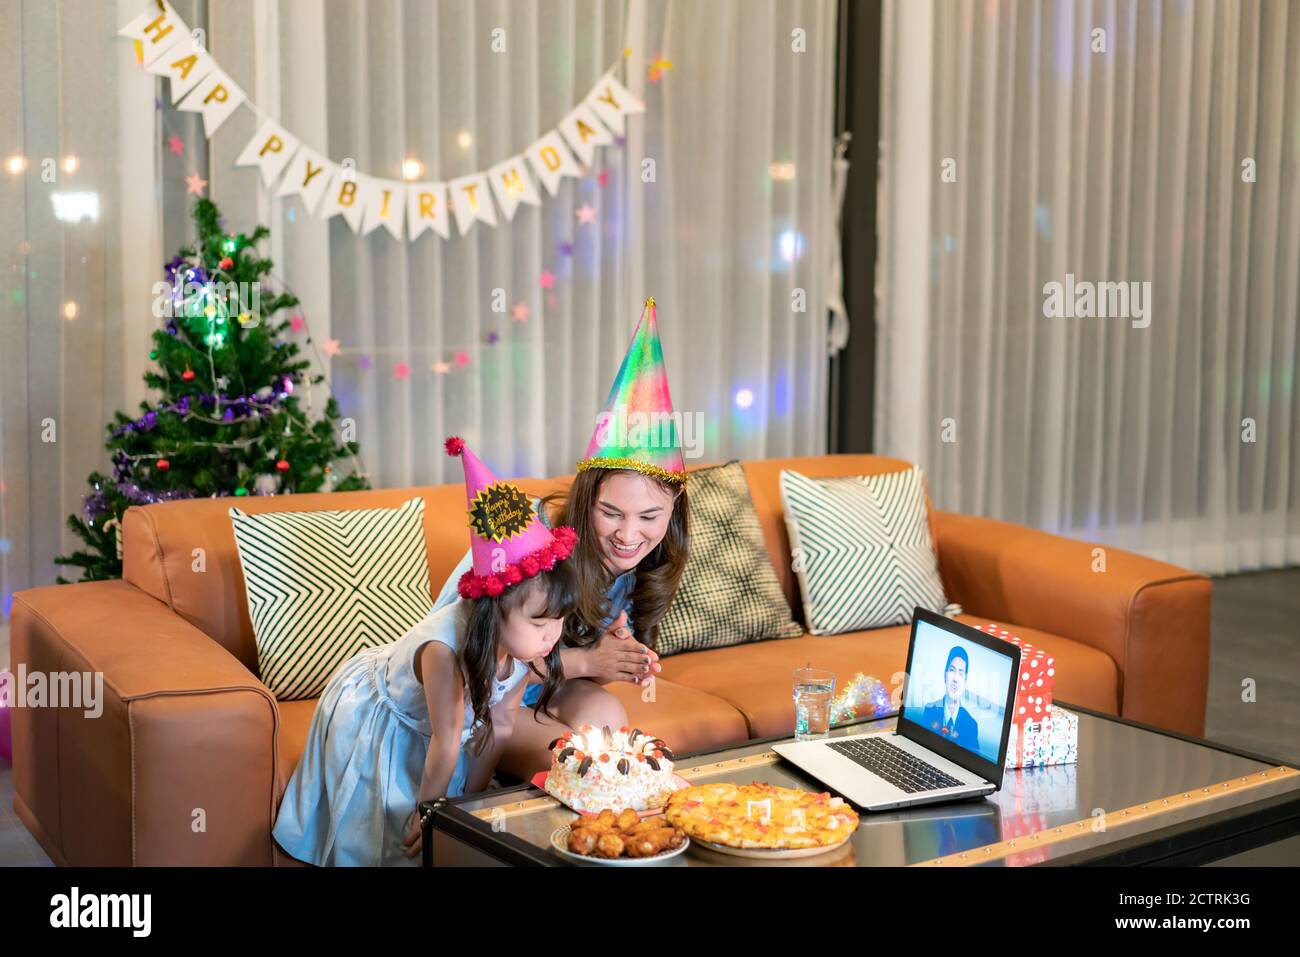 Happy little girl celebrating birthday with her mother at home with father on video call in laptop while blowing candles in cake on table. Stock Photo